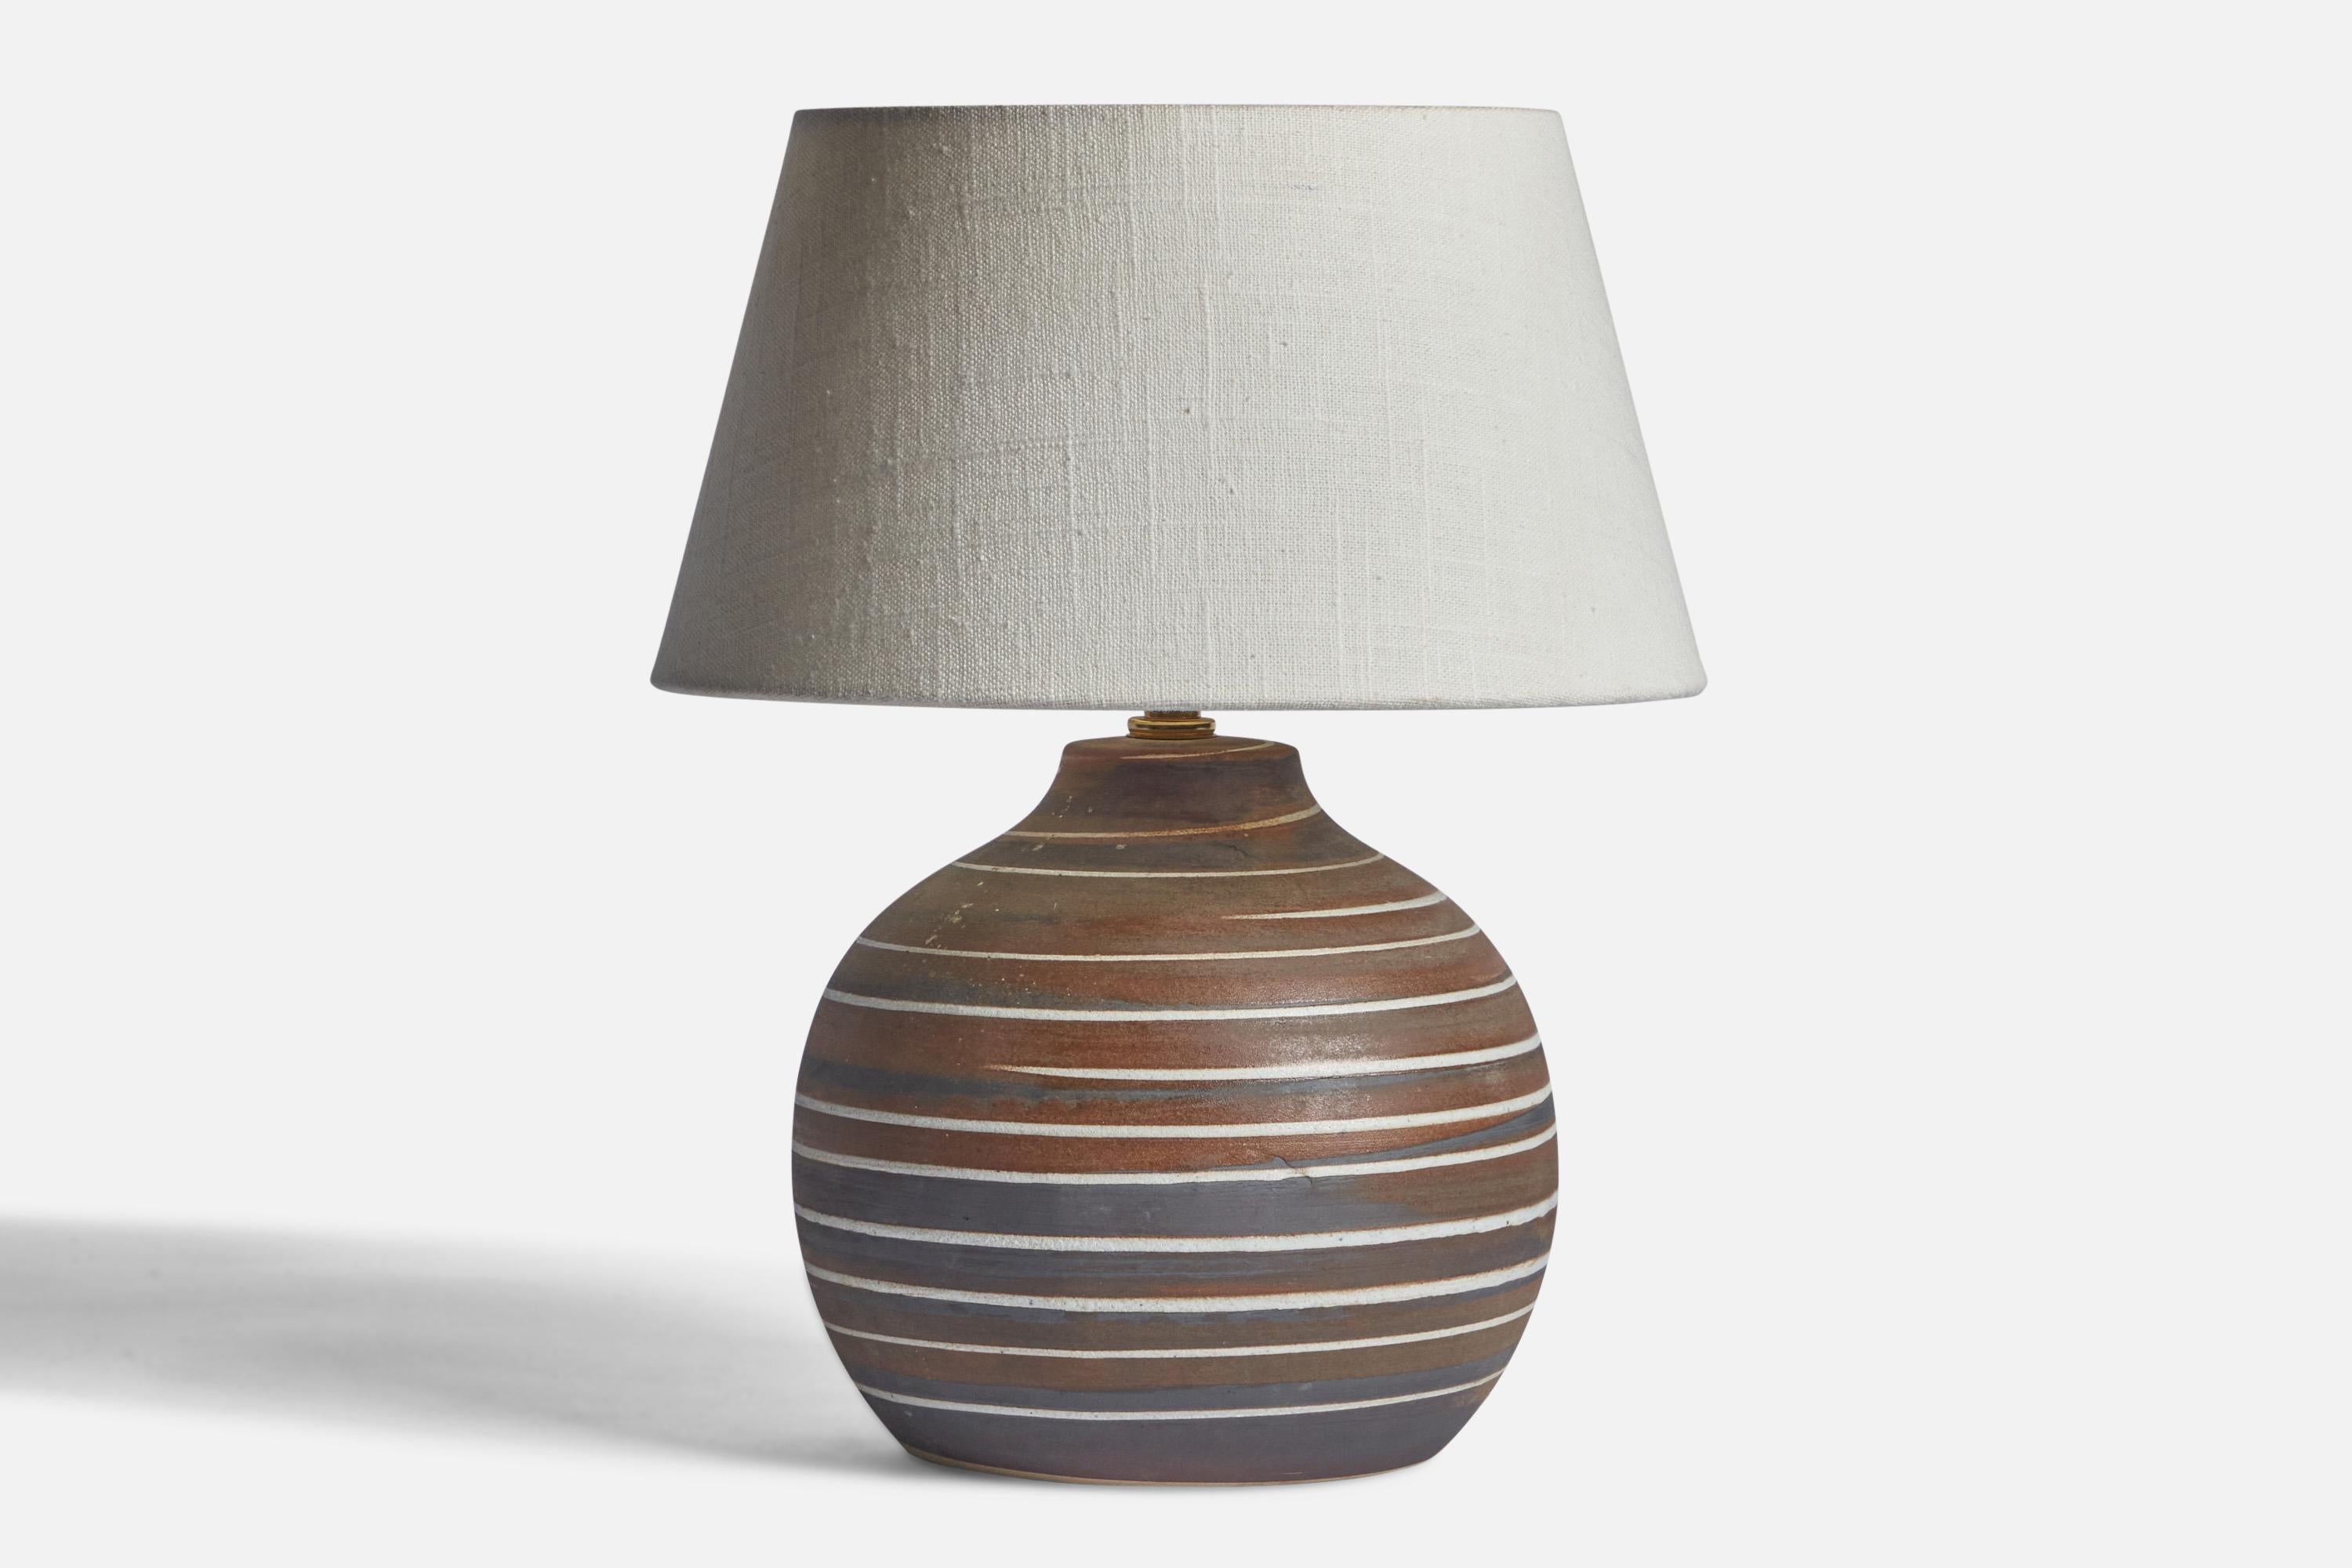 An off-white and brown-glazed ceramic table lamp designed by Jane & Gordon Martz and produced by Marshall Studios, USA, 1960s.

Dimensions of Lamp (inches): 10.45” H x 5.4” Diameter
Dimensions of Shade (inches): 7” Top Diameter x 10” Bottom Diameter